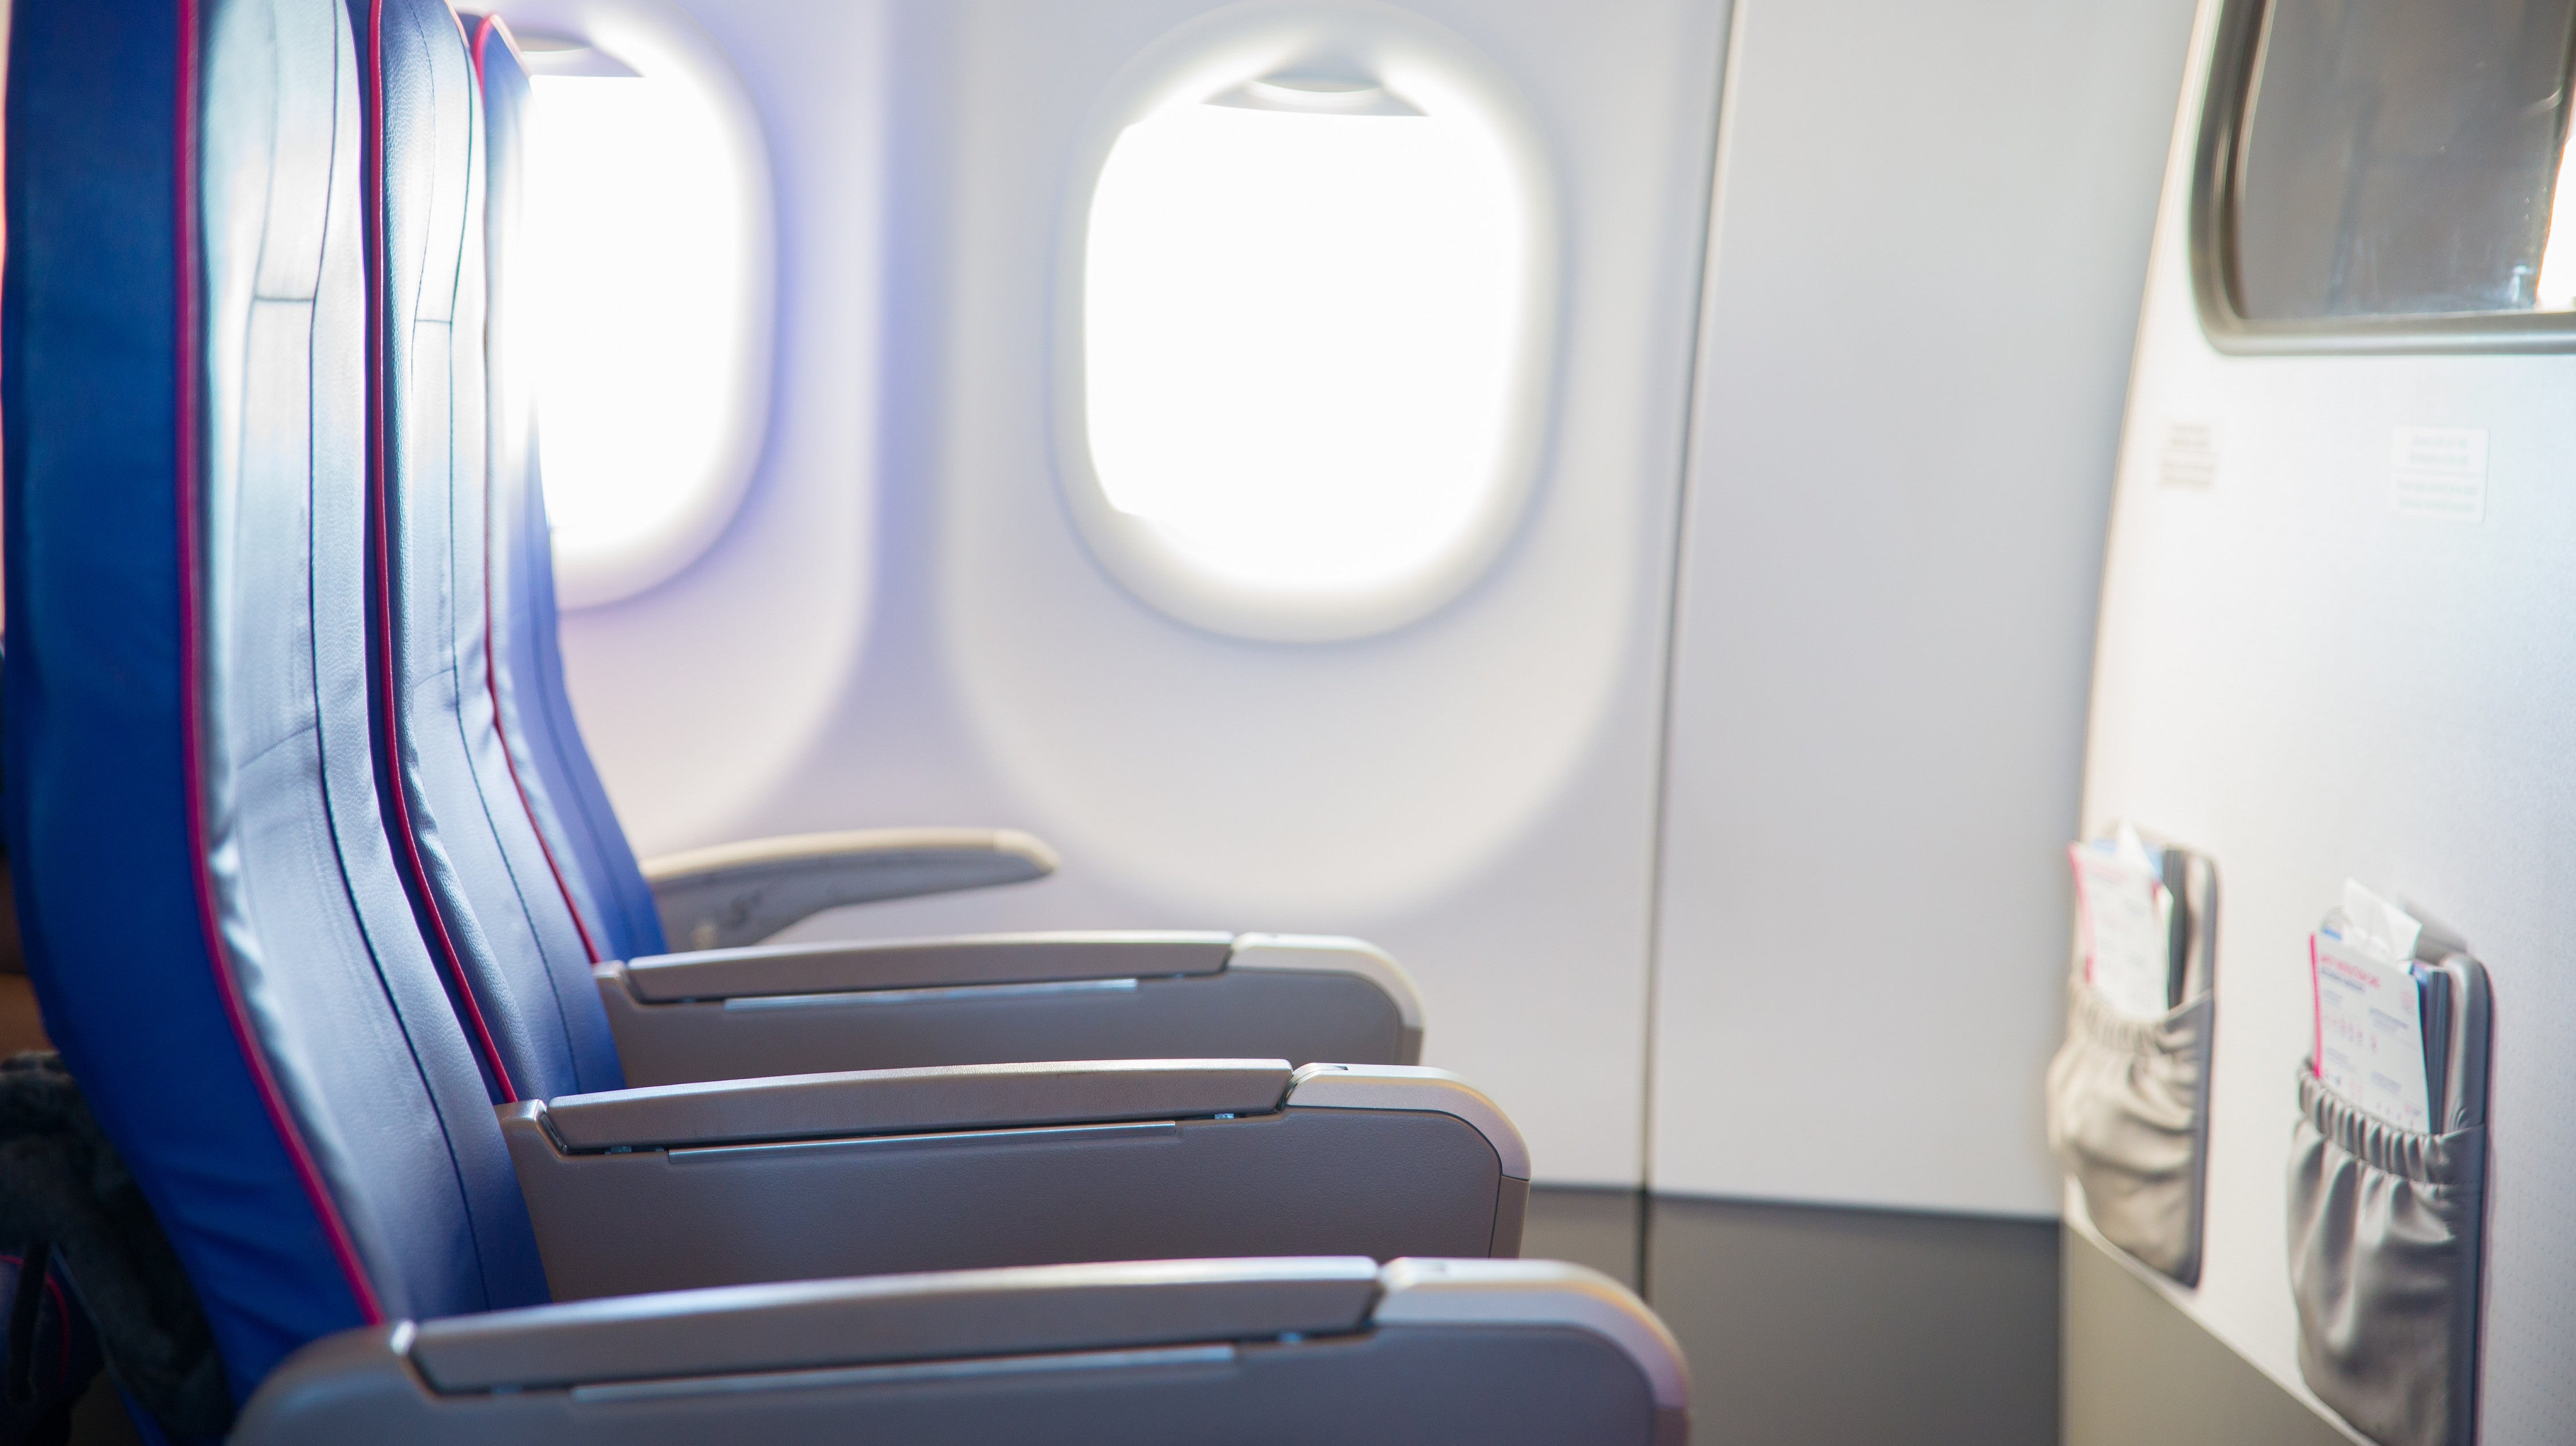 What You Should Know Before Booking A Bulkhead Seat On A Flight